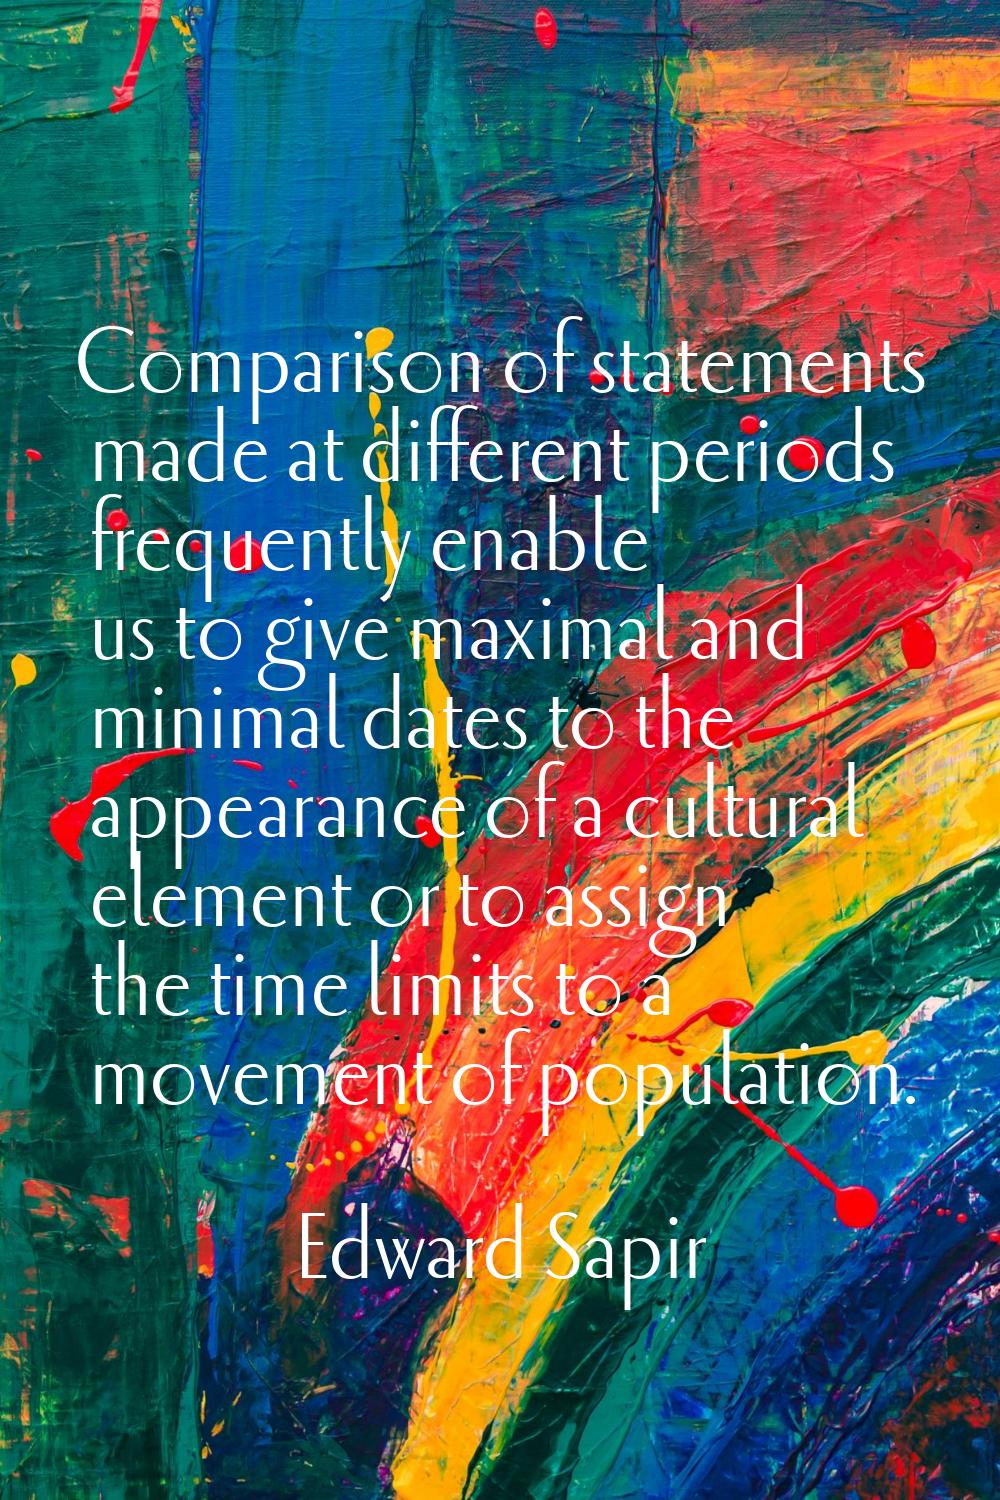 Comparison of statements made at different periods frequently enable us to give maximal and minimal